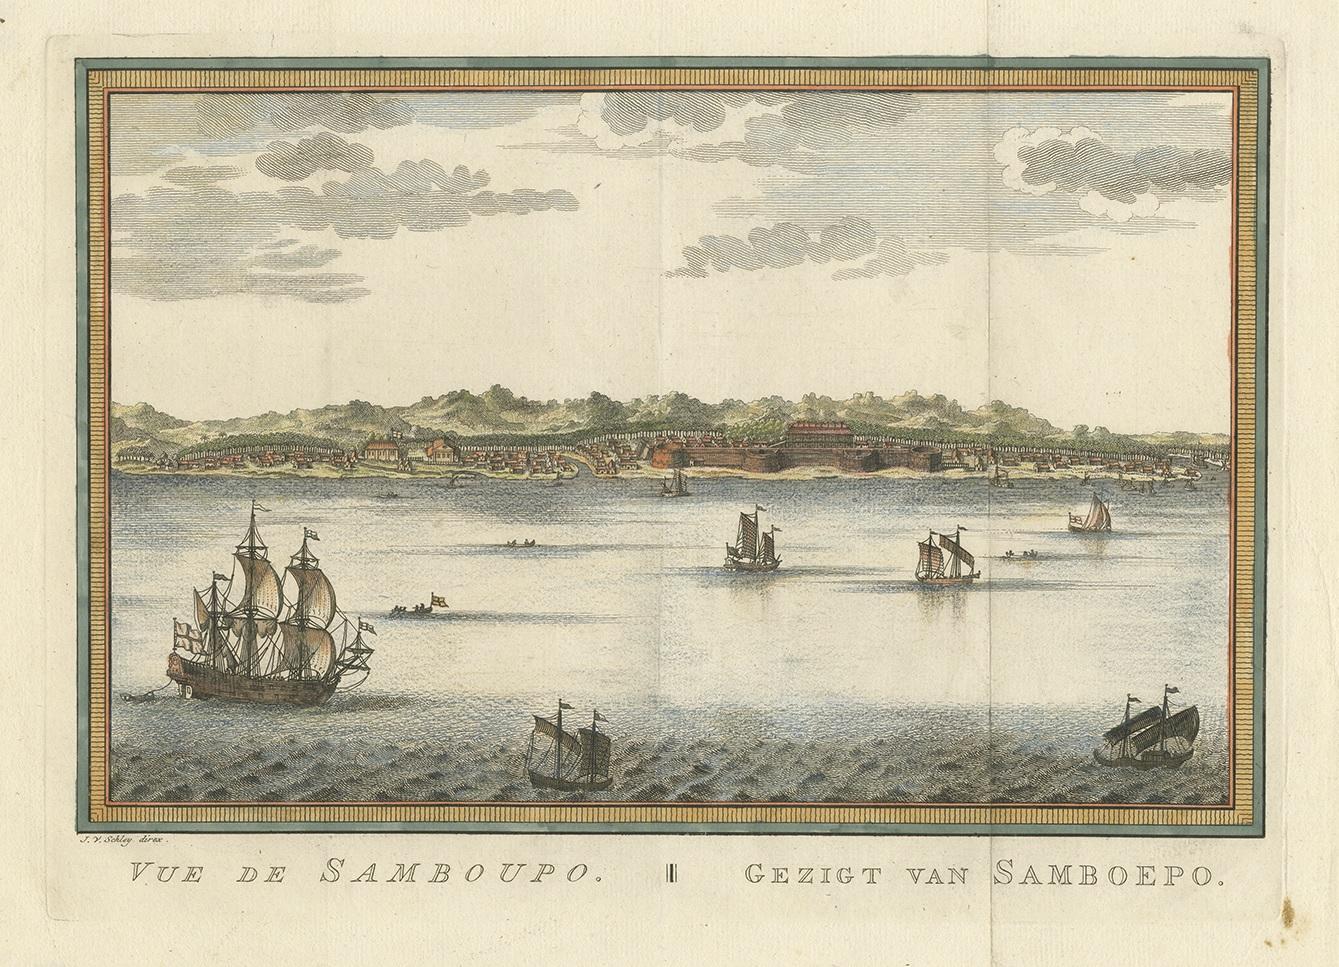 Antique print titled 'Vue de Samboupo - Gezigt van Samboepo'. Attractive detailed view of Samboupo on the island of Celebes (Sulawesi) Indonesia. Engraved by J. van Schley, circa 1750.